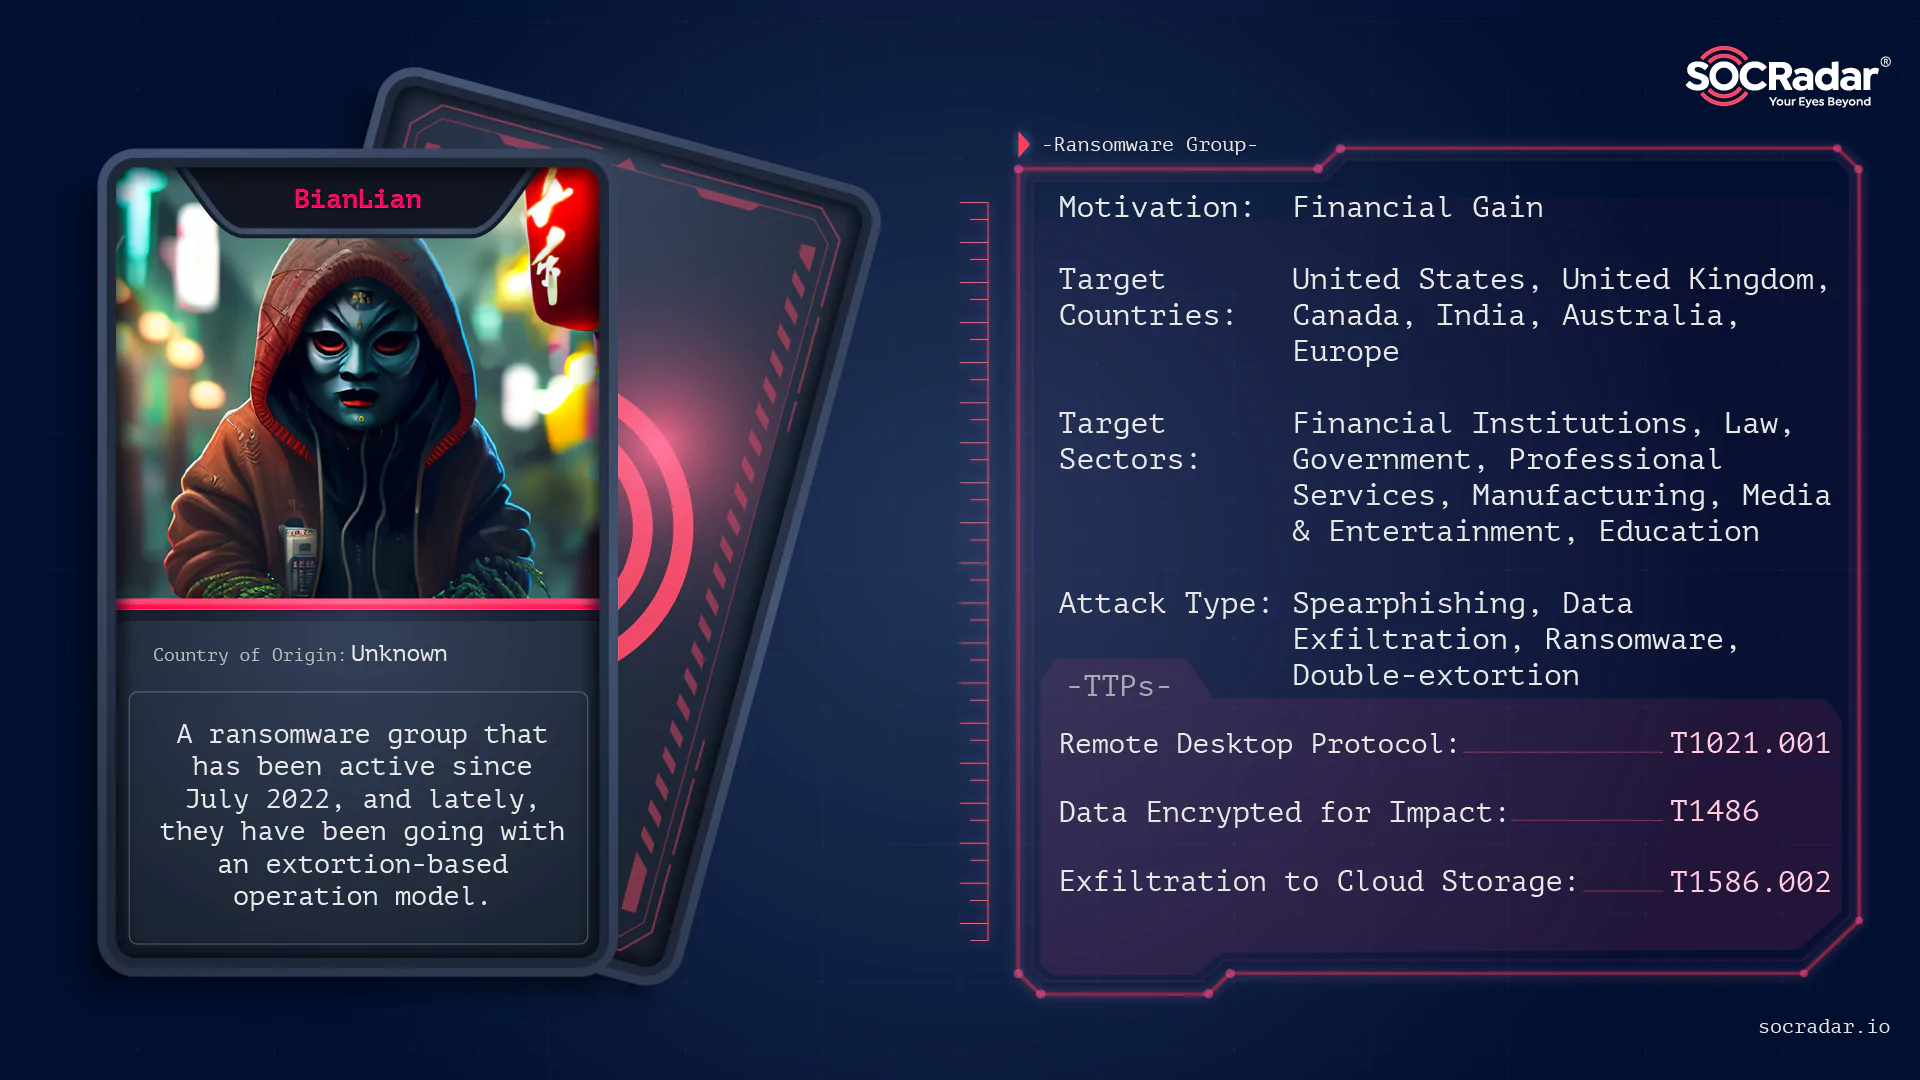 You can explore BianLian’s operations and tactics through our Threat Actor Profile.